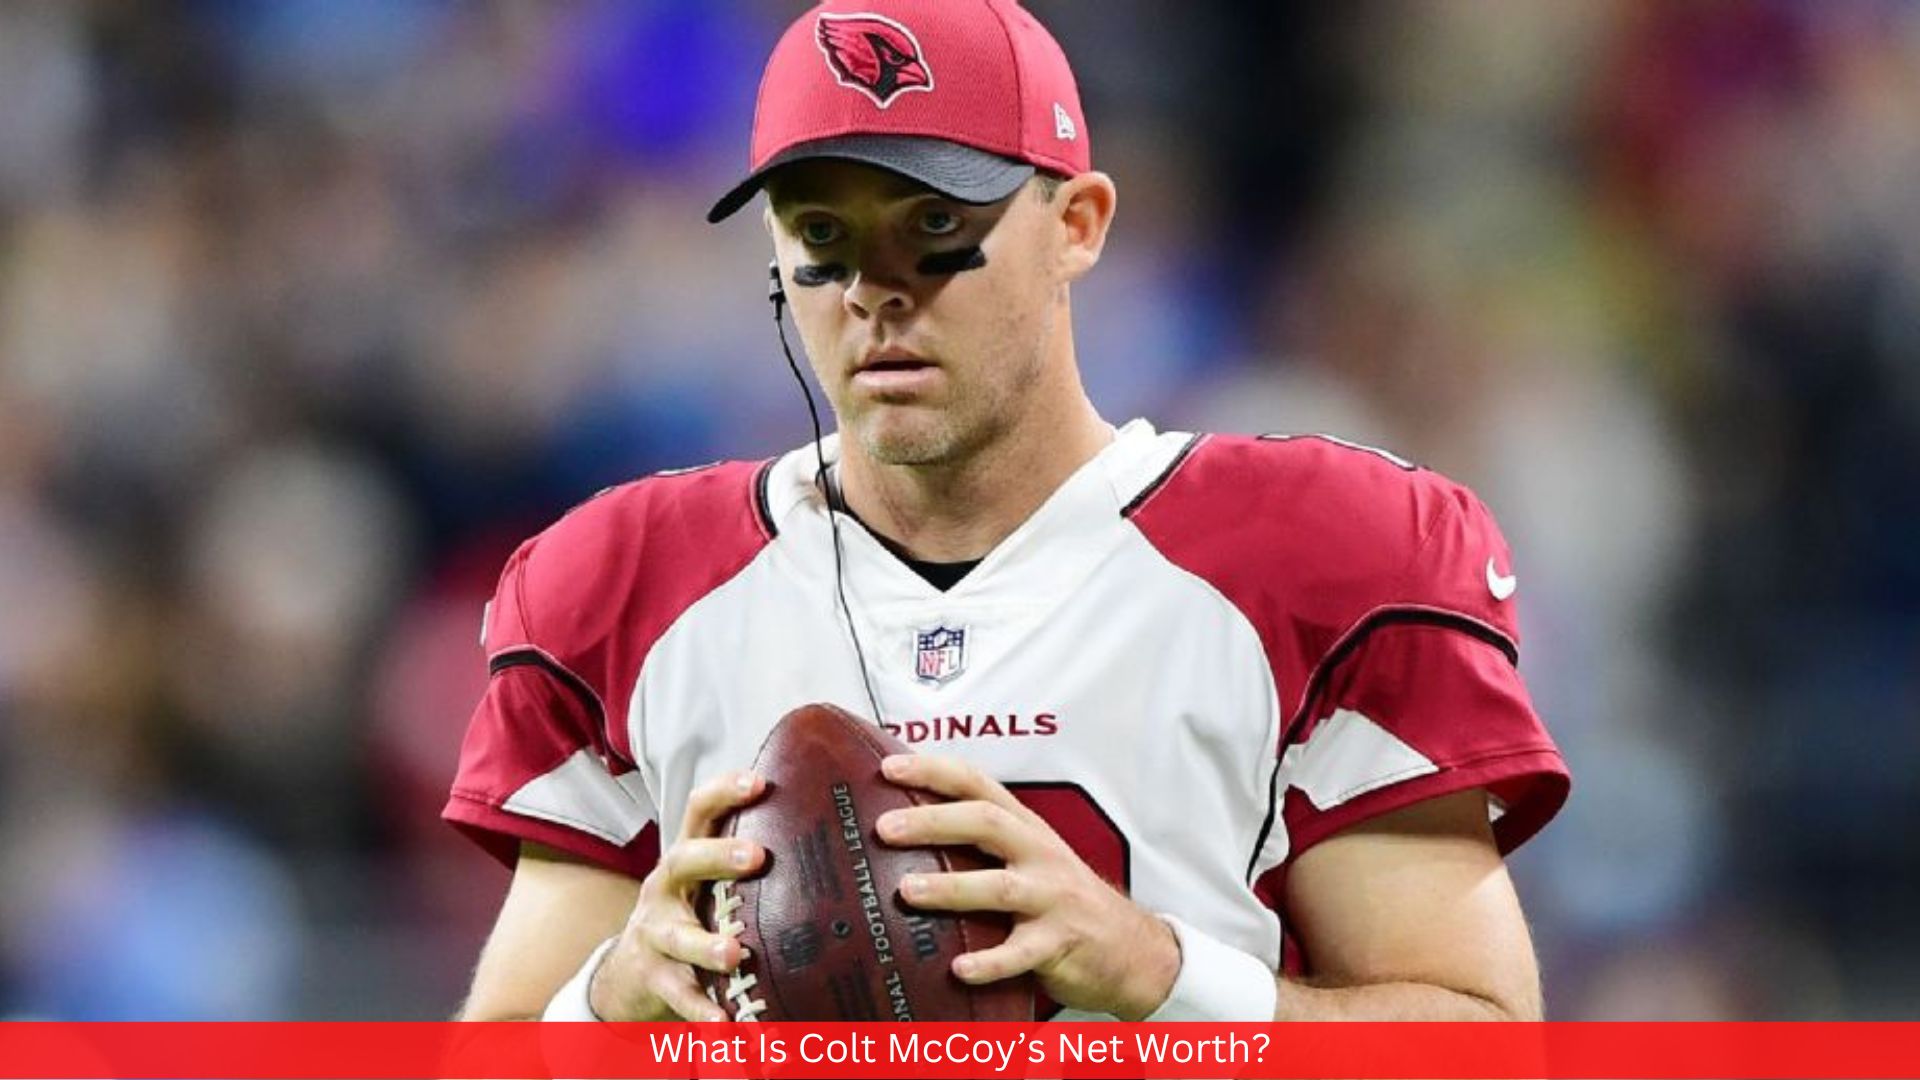 What Is Colt McCoy’s Net Worth?